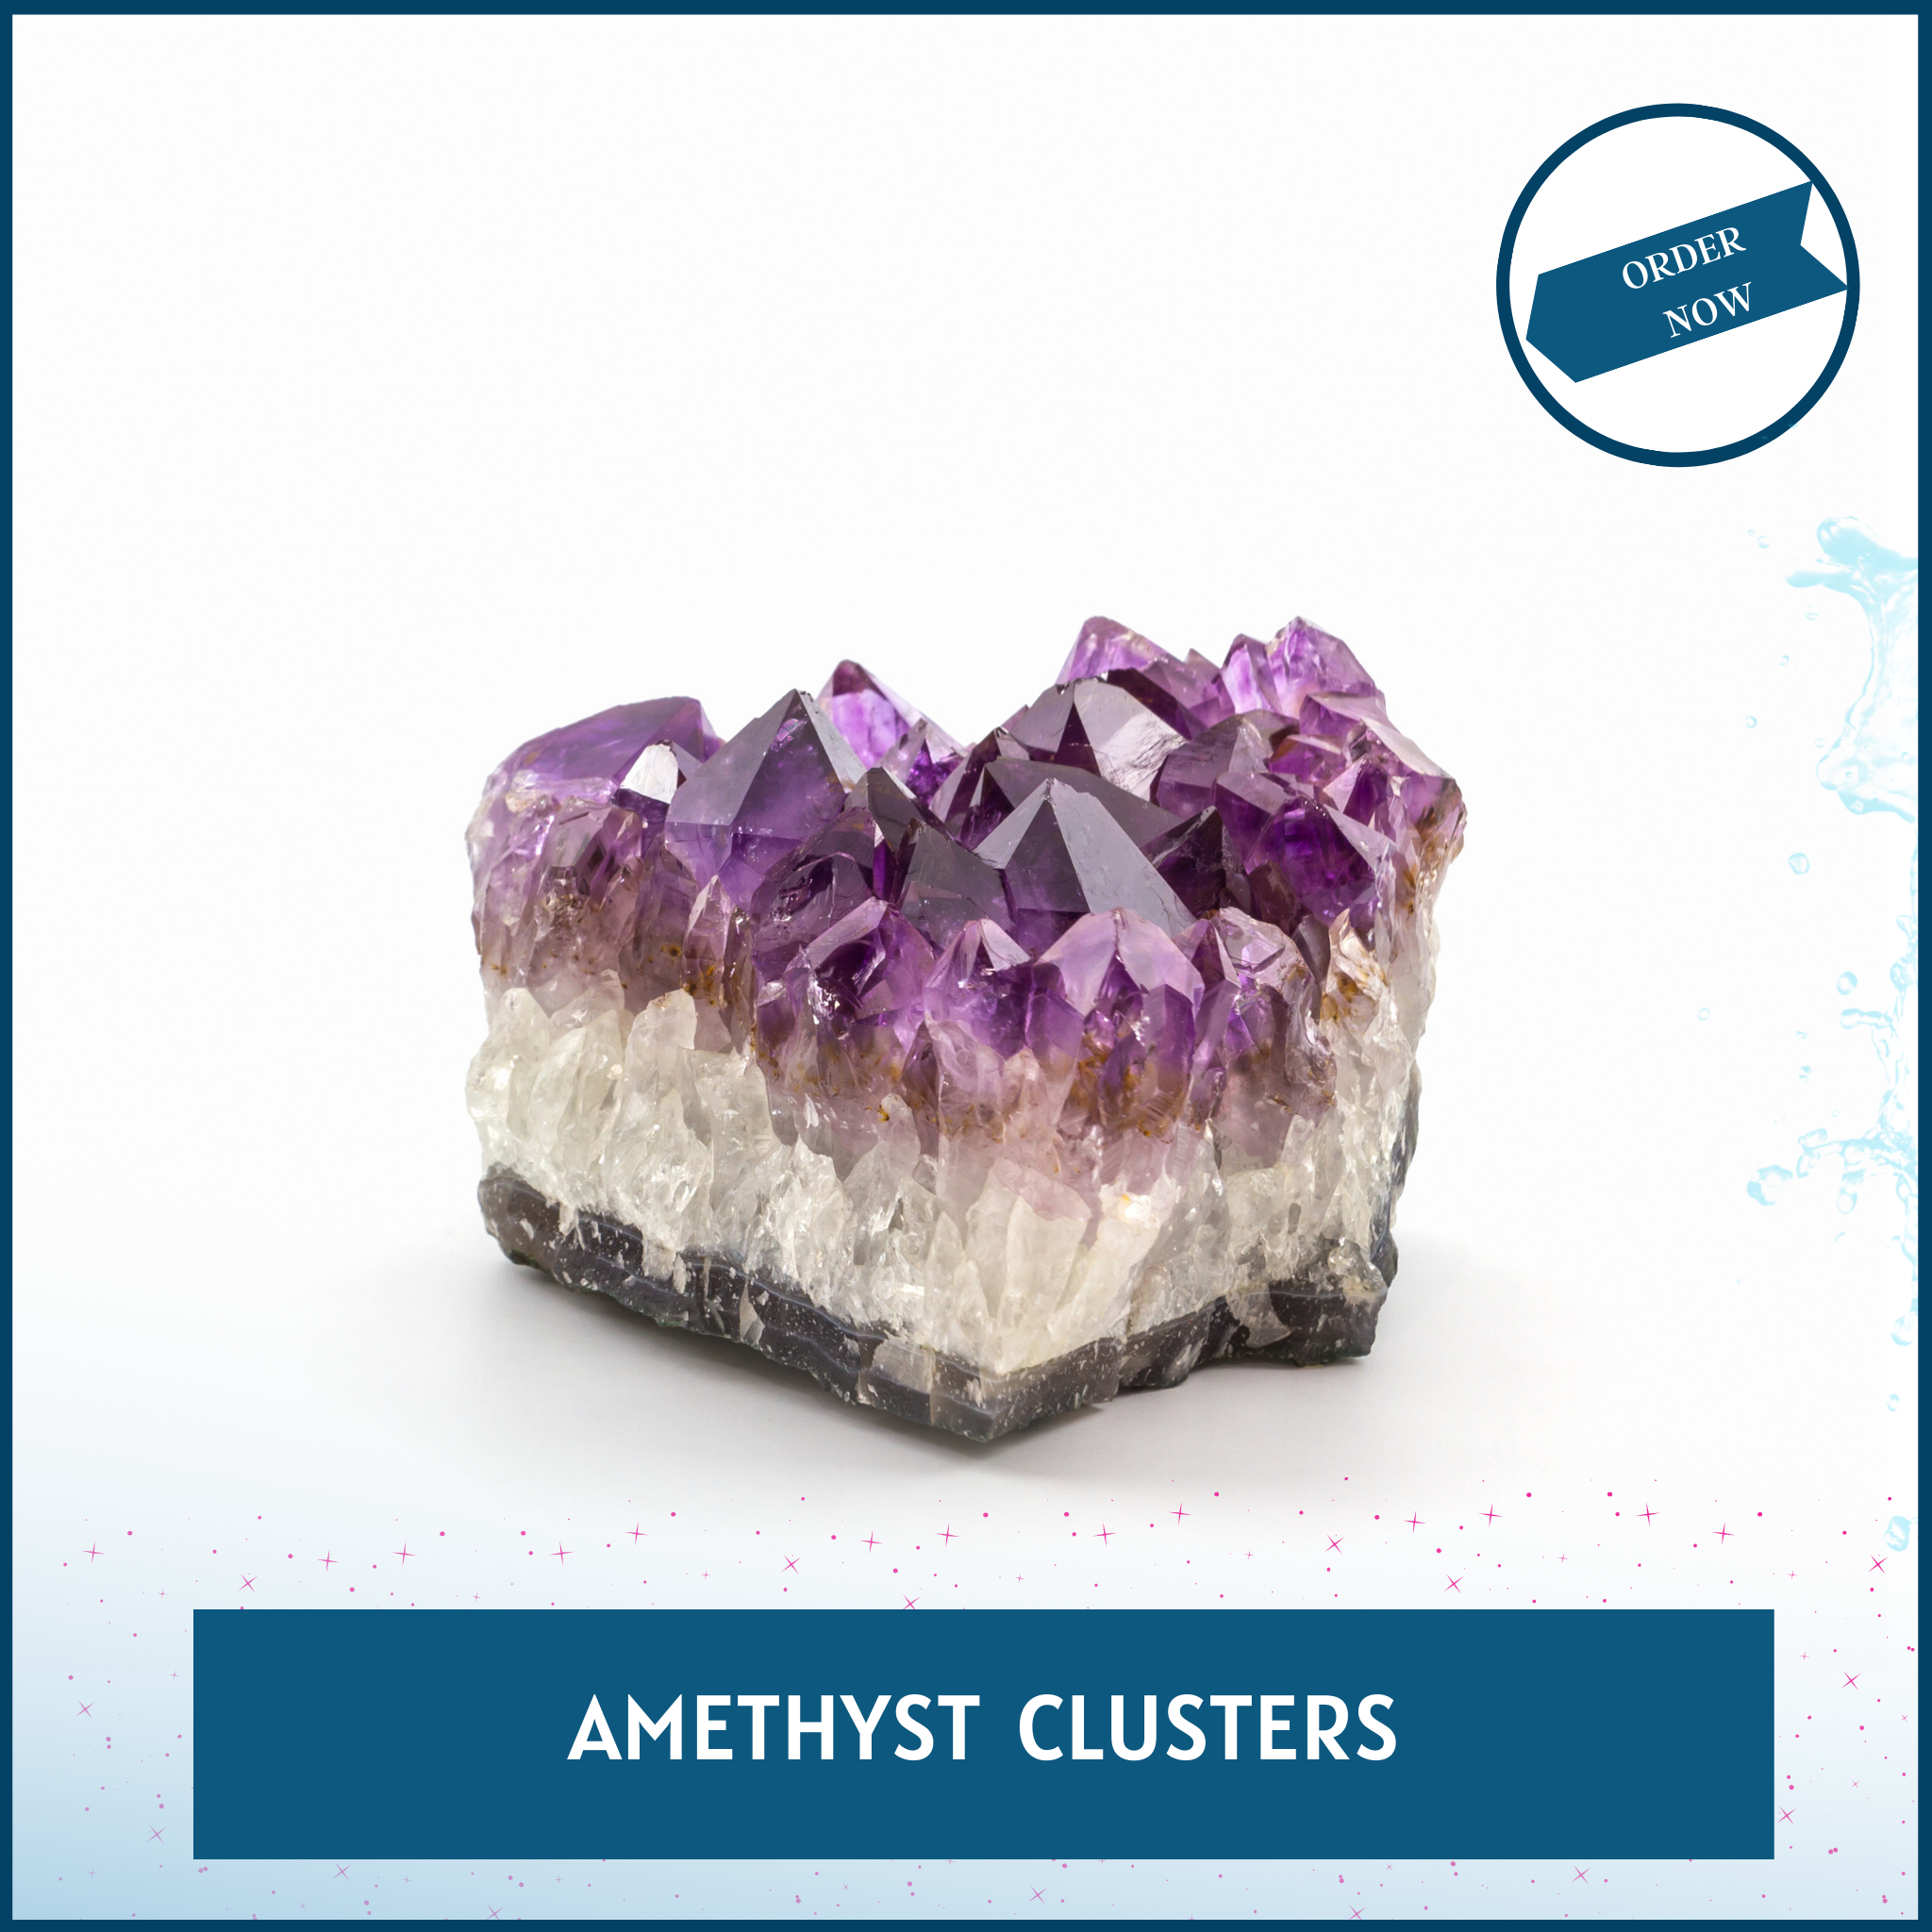 Enhance Your Space with Stunning Amethyst Clusters - Natural Healing Crystals for Positive Energy and Décor-1